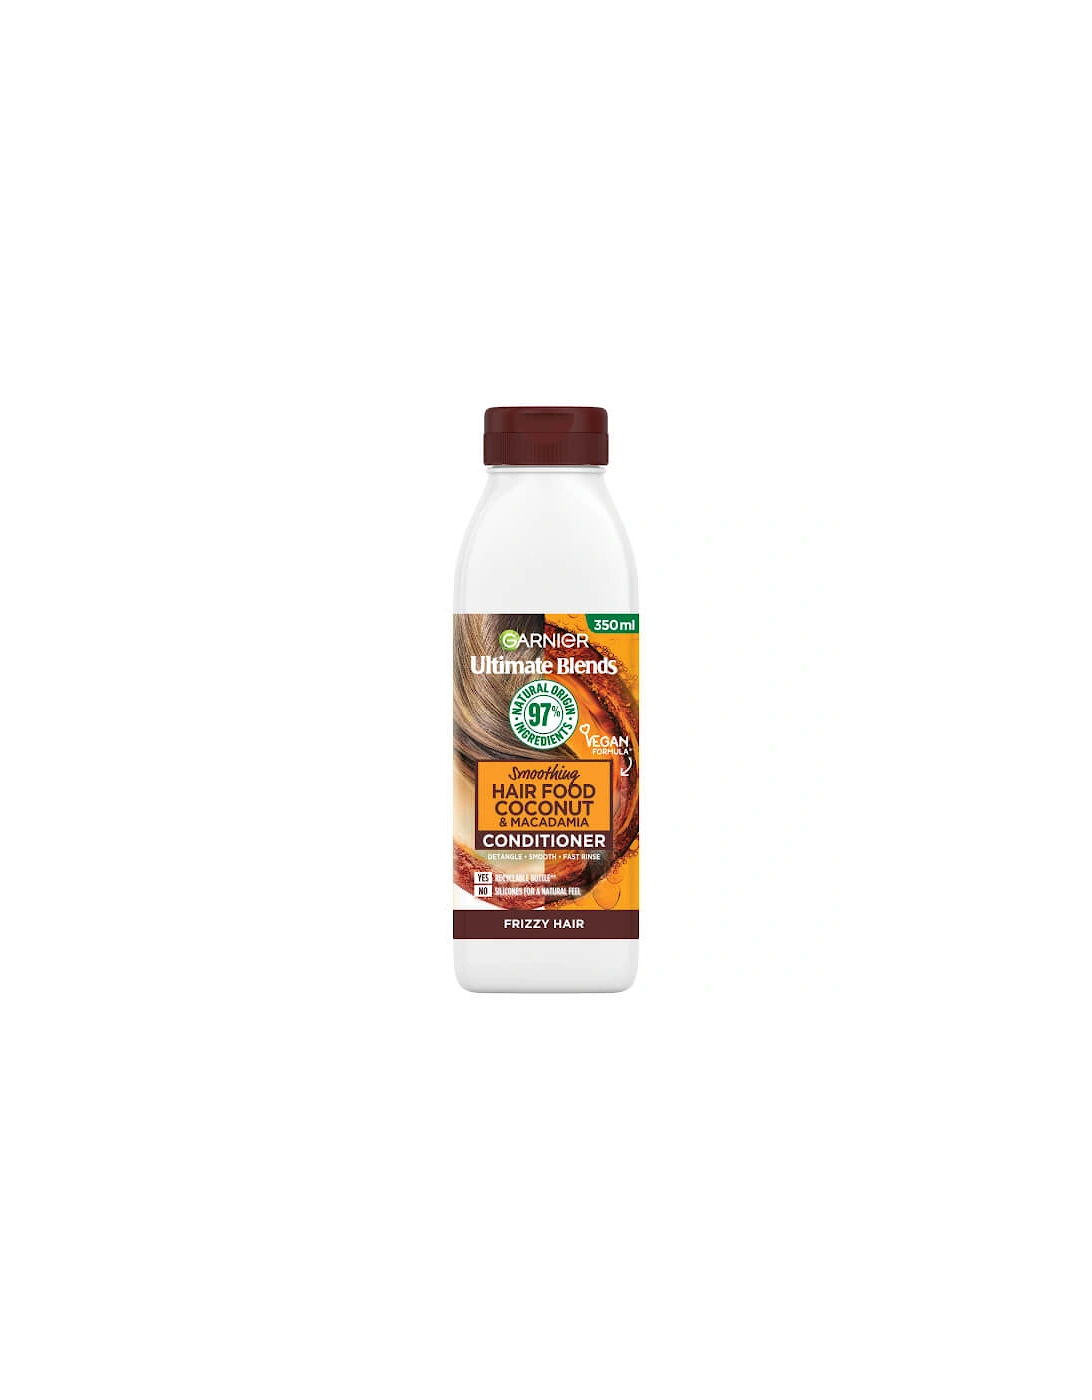 Ultimate Blends Smoothing Hair Food Coconut Conditioner for Frizzy Hair 350ml, 2 of 1